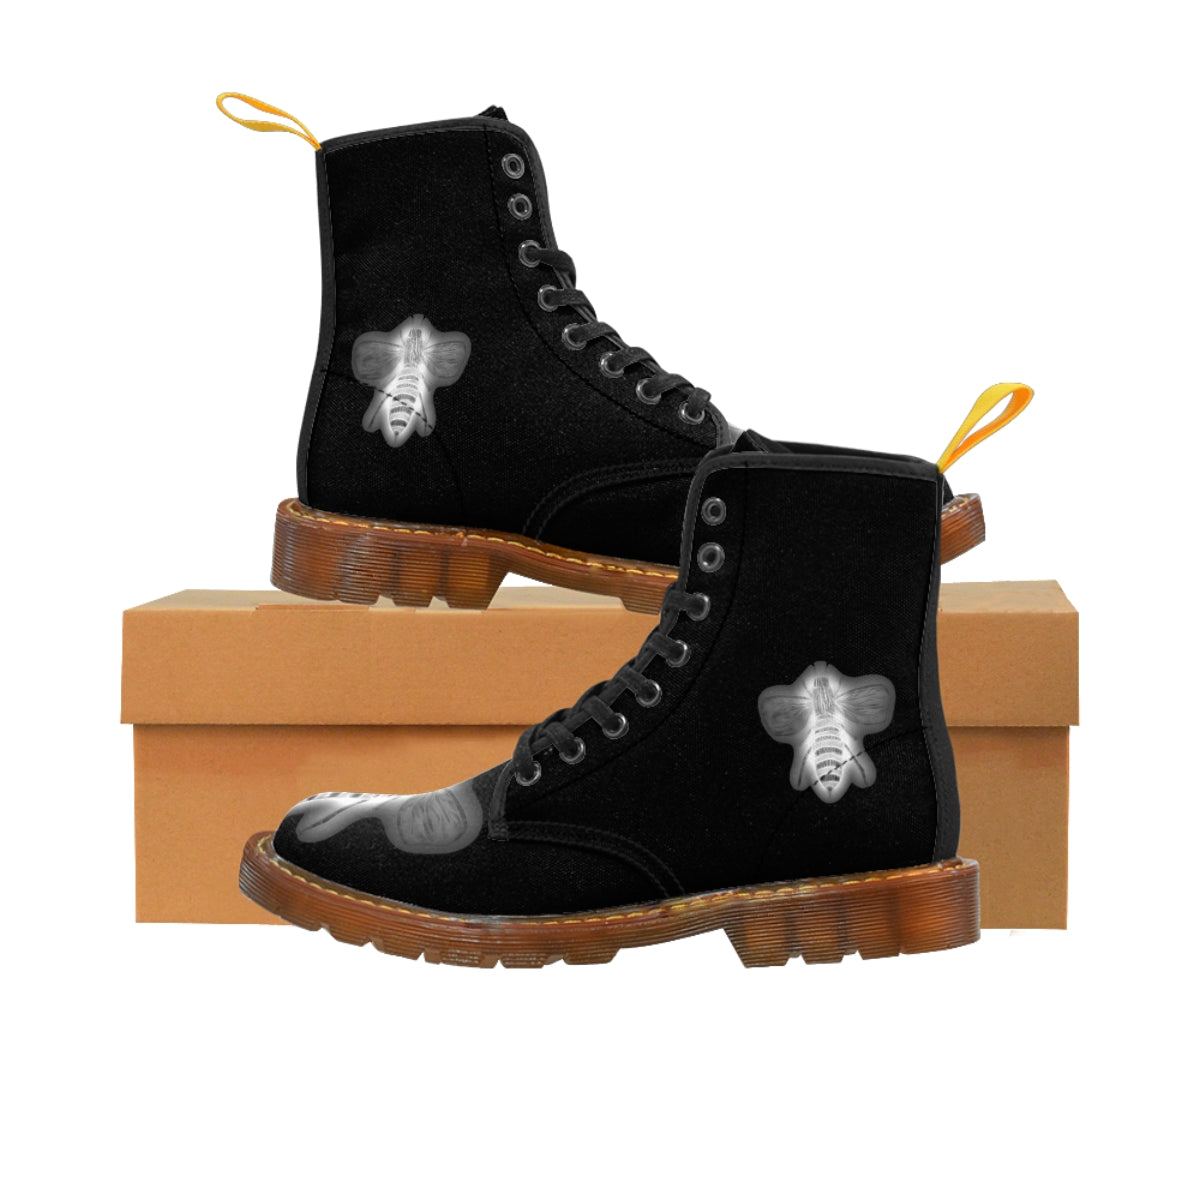 Negative Bee Women's Black Canvas Boots Brown Shoes Bee boots combat boots fun womens boots original art boots Shoes unique womens boots vegan boots vegan combat boots womens black boots womens boots womens fashion boots